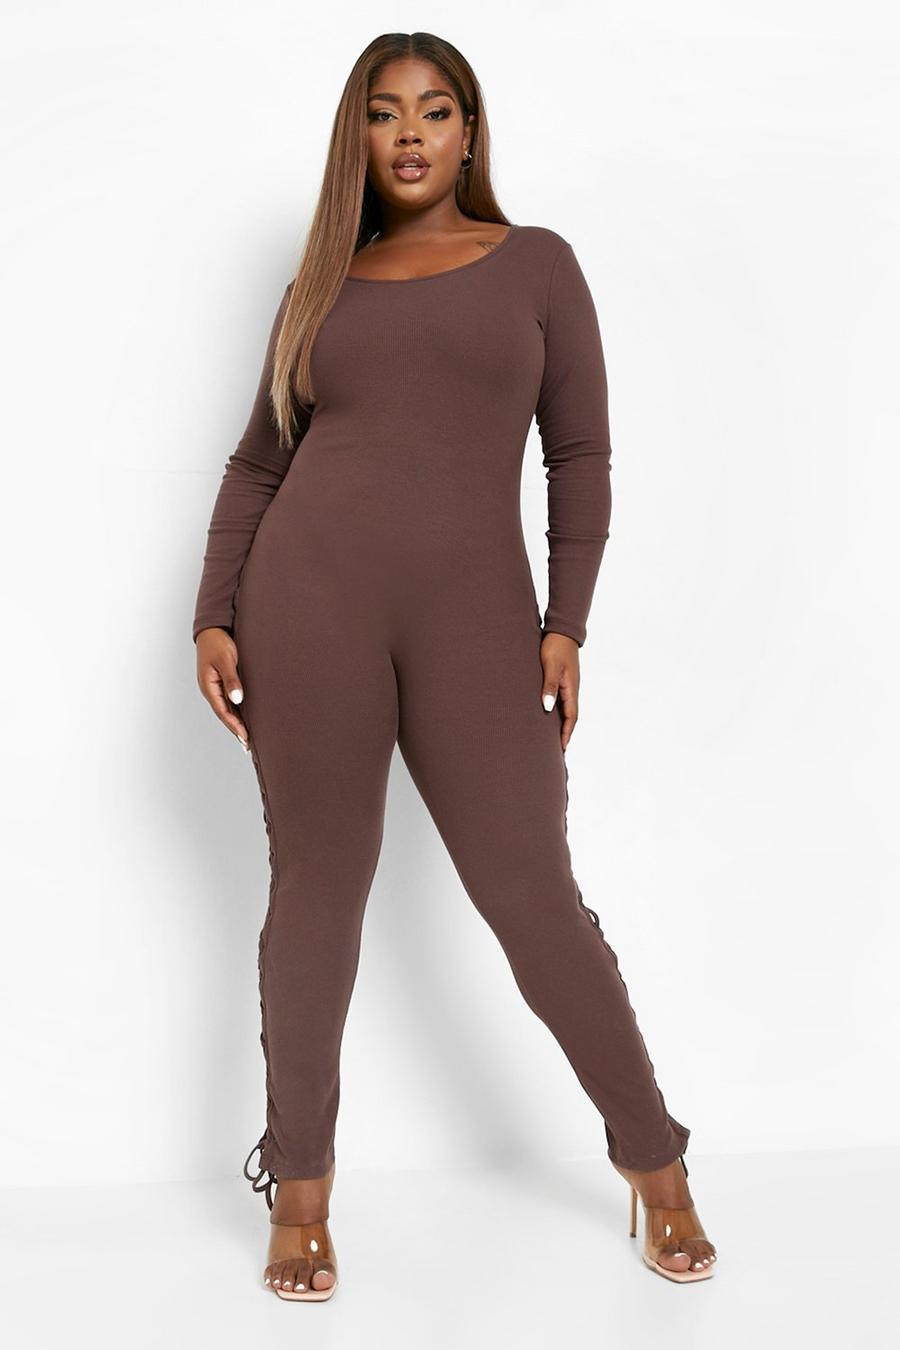 Chocolate brown Plus Rib Long Sleeve Lace Up Jumpsuit